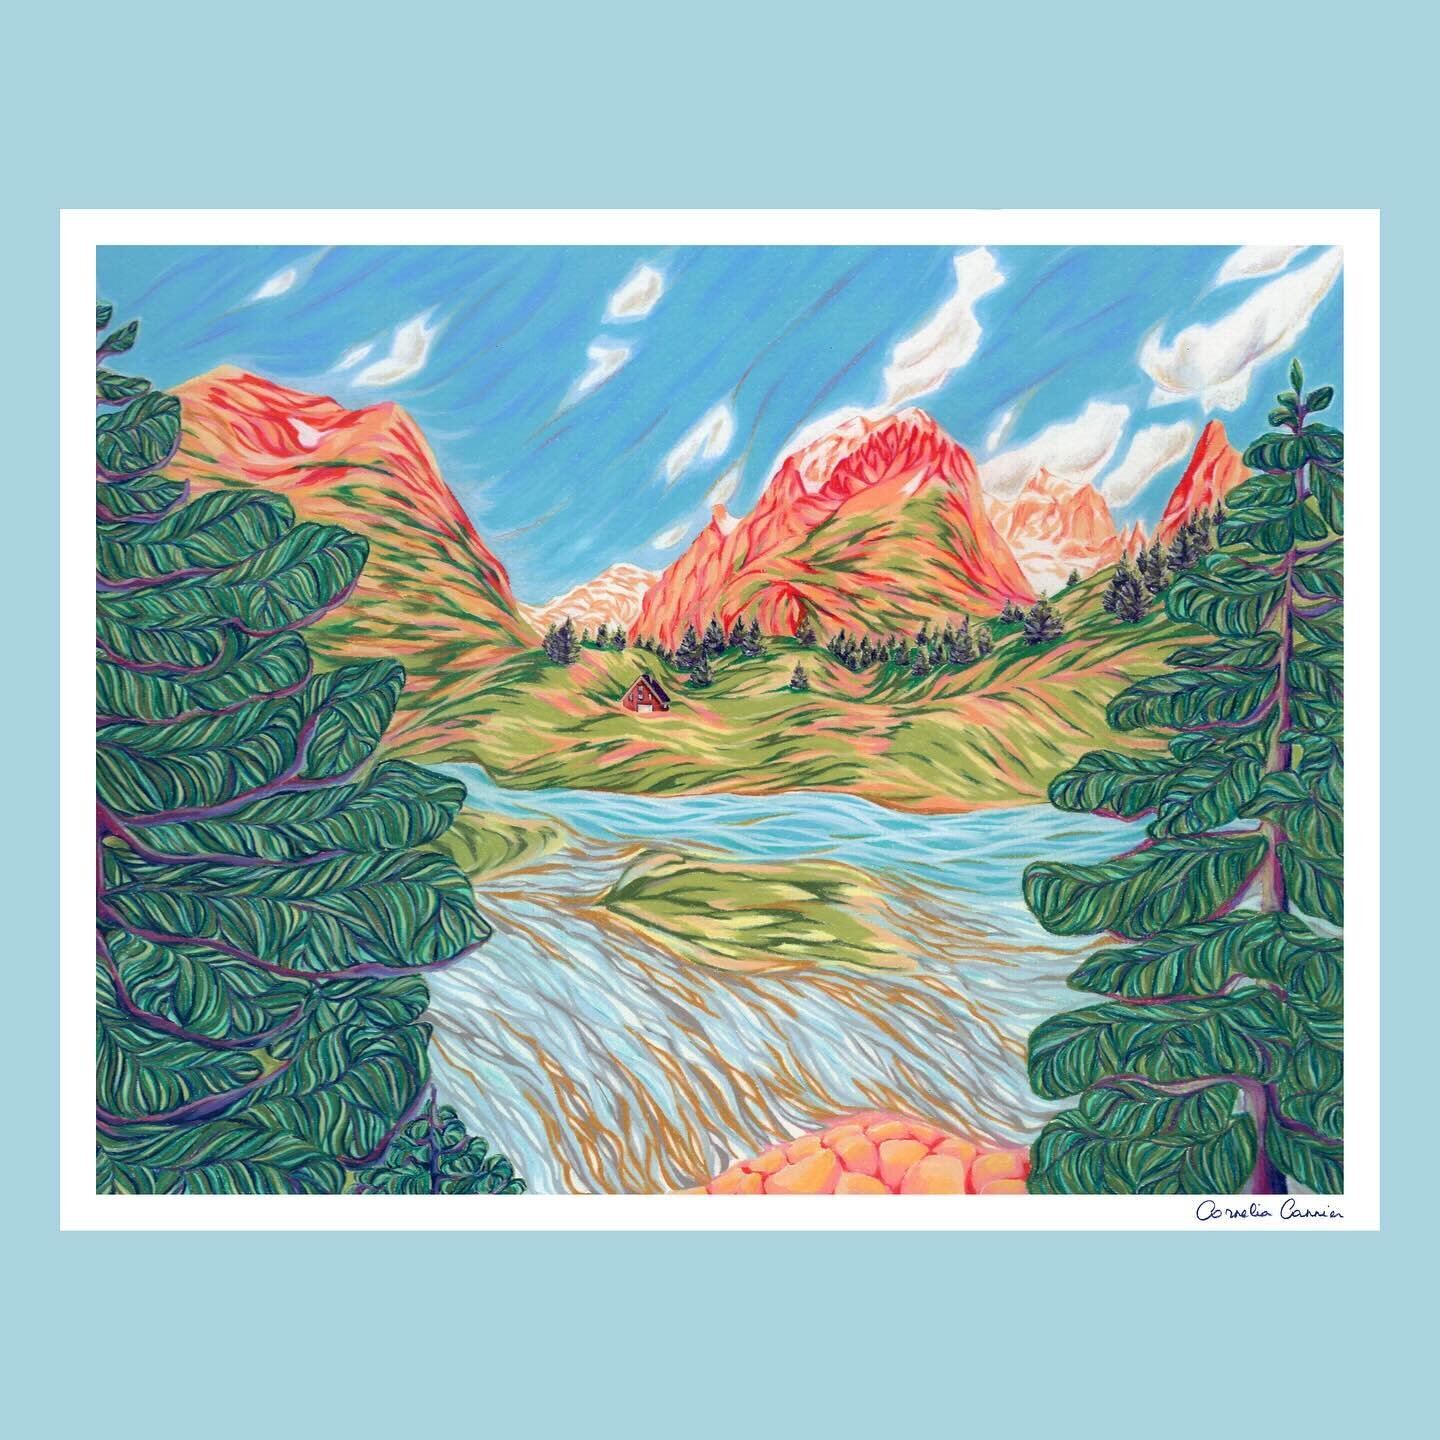 Lac de Combal 🎉🏔️ ! 

40x50cm sur papier 340gr @sennelier1887 
Pastels NeocolorII @carandache 

Entry for the @theydrawandgarden &amp; @uppercasemag challenge 👌

#uppercaseandtheydraw #landscapeart #hiking #greatoutdoors #womaninart #carandache #n